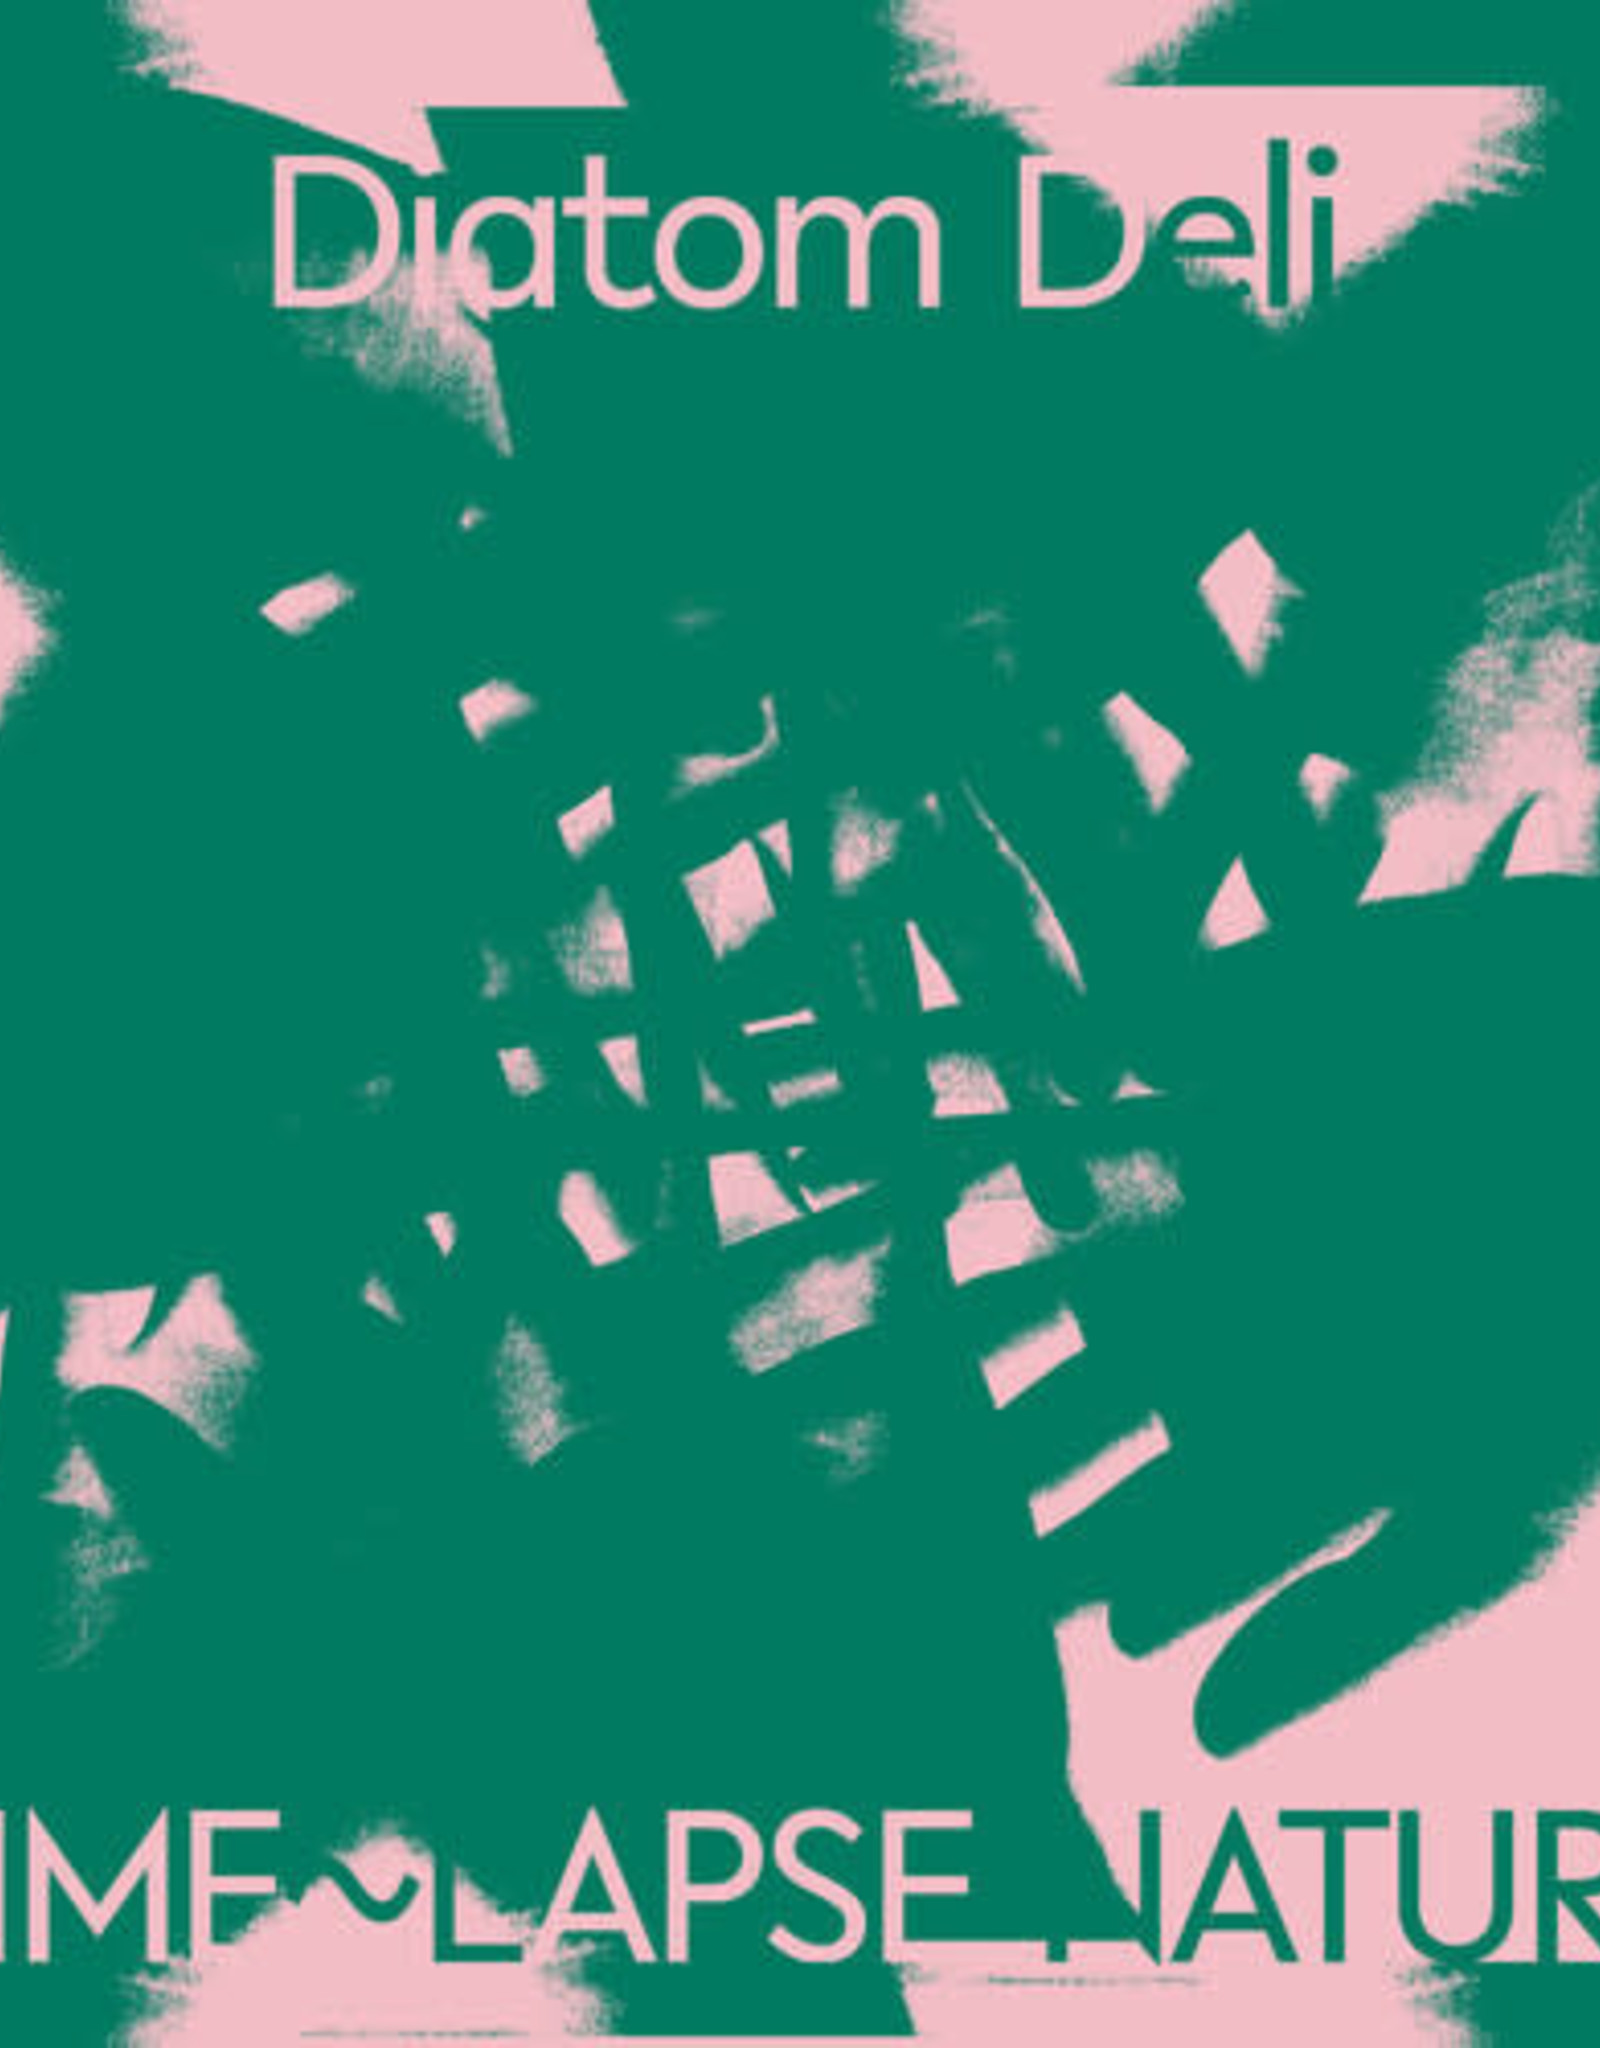 Diatom Deli - Time~Lapse Nature (Indie Exclusive) (Green & White  Marbled Vinyl LP)